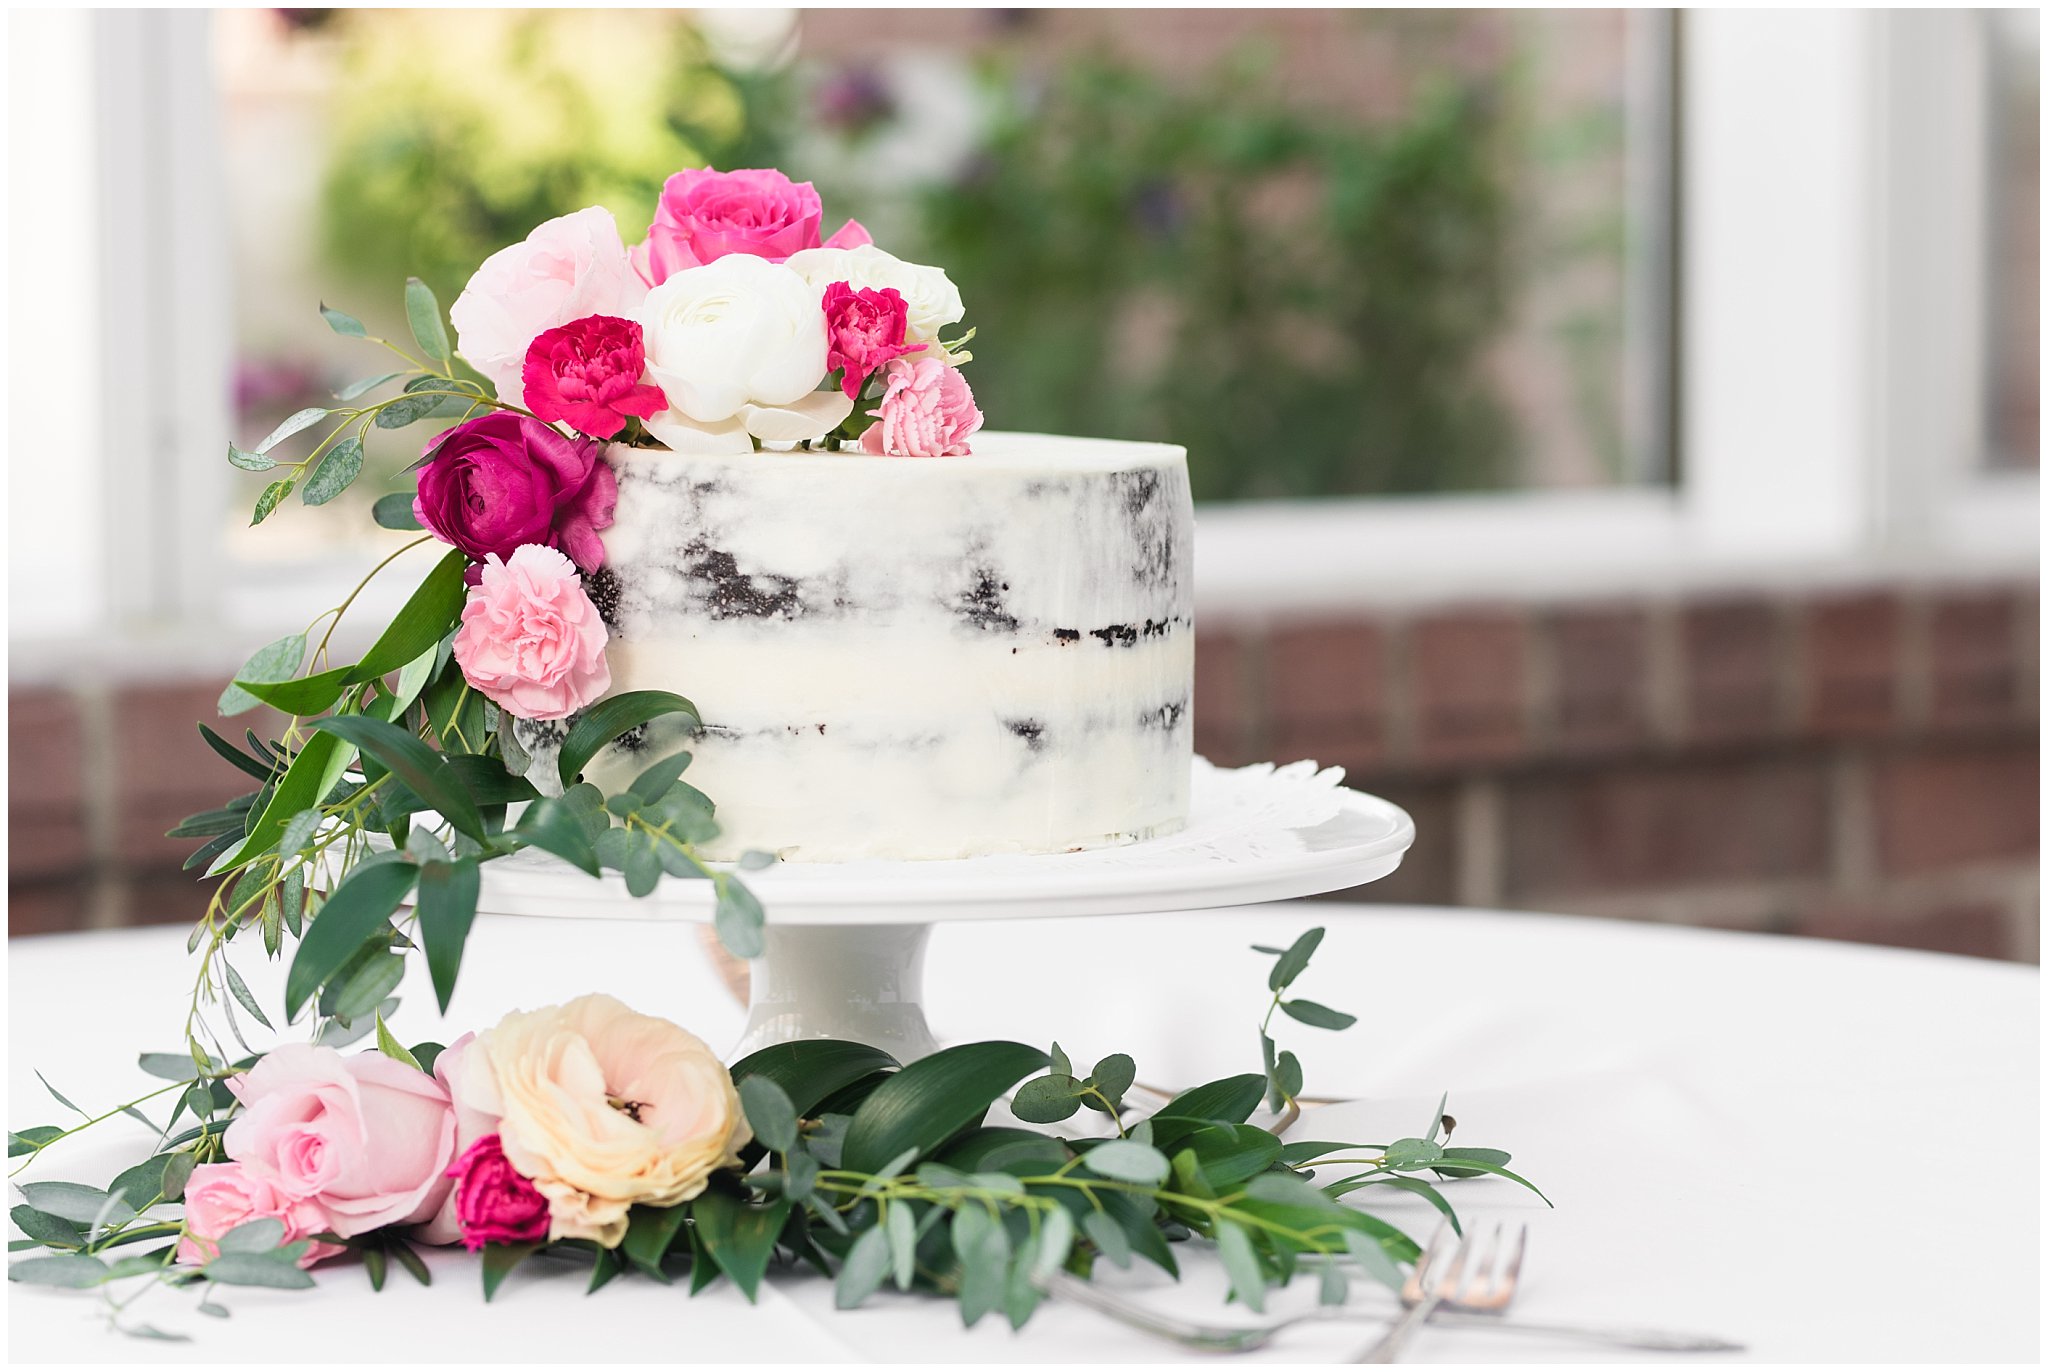 Cookies and cream cake in front of windows and covered with pink and white florals | Talia Event Center Summer Wedding | Jessie and Dallin Photography